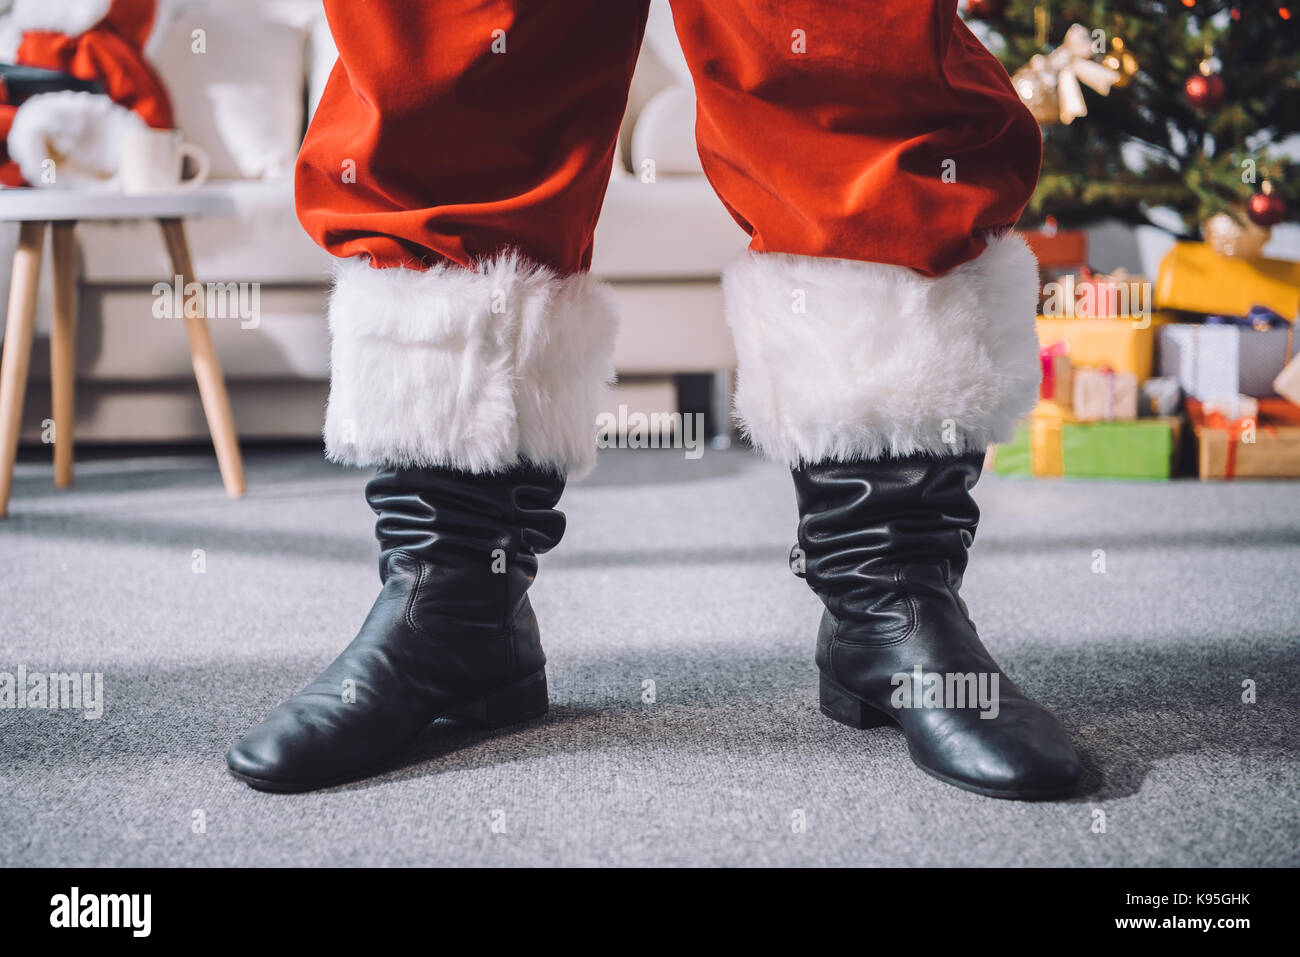 Christmas Little Red Boots Decor Creative Santa Claus Boots